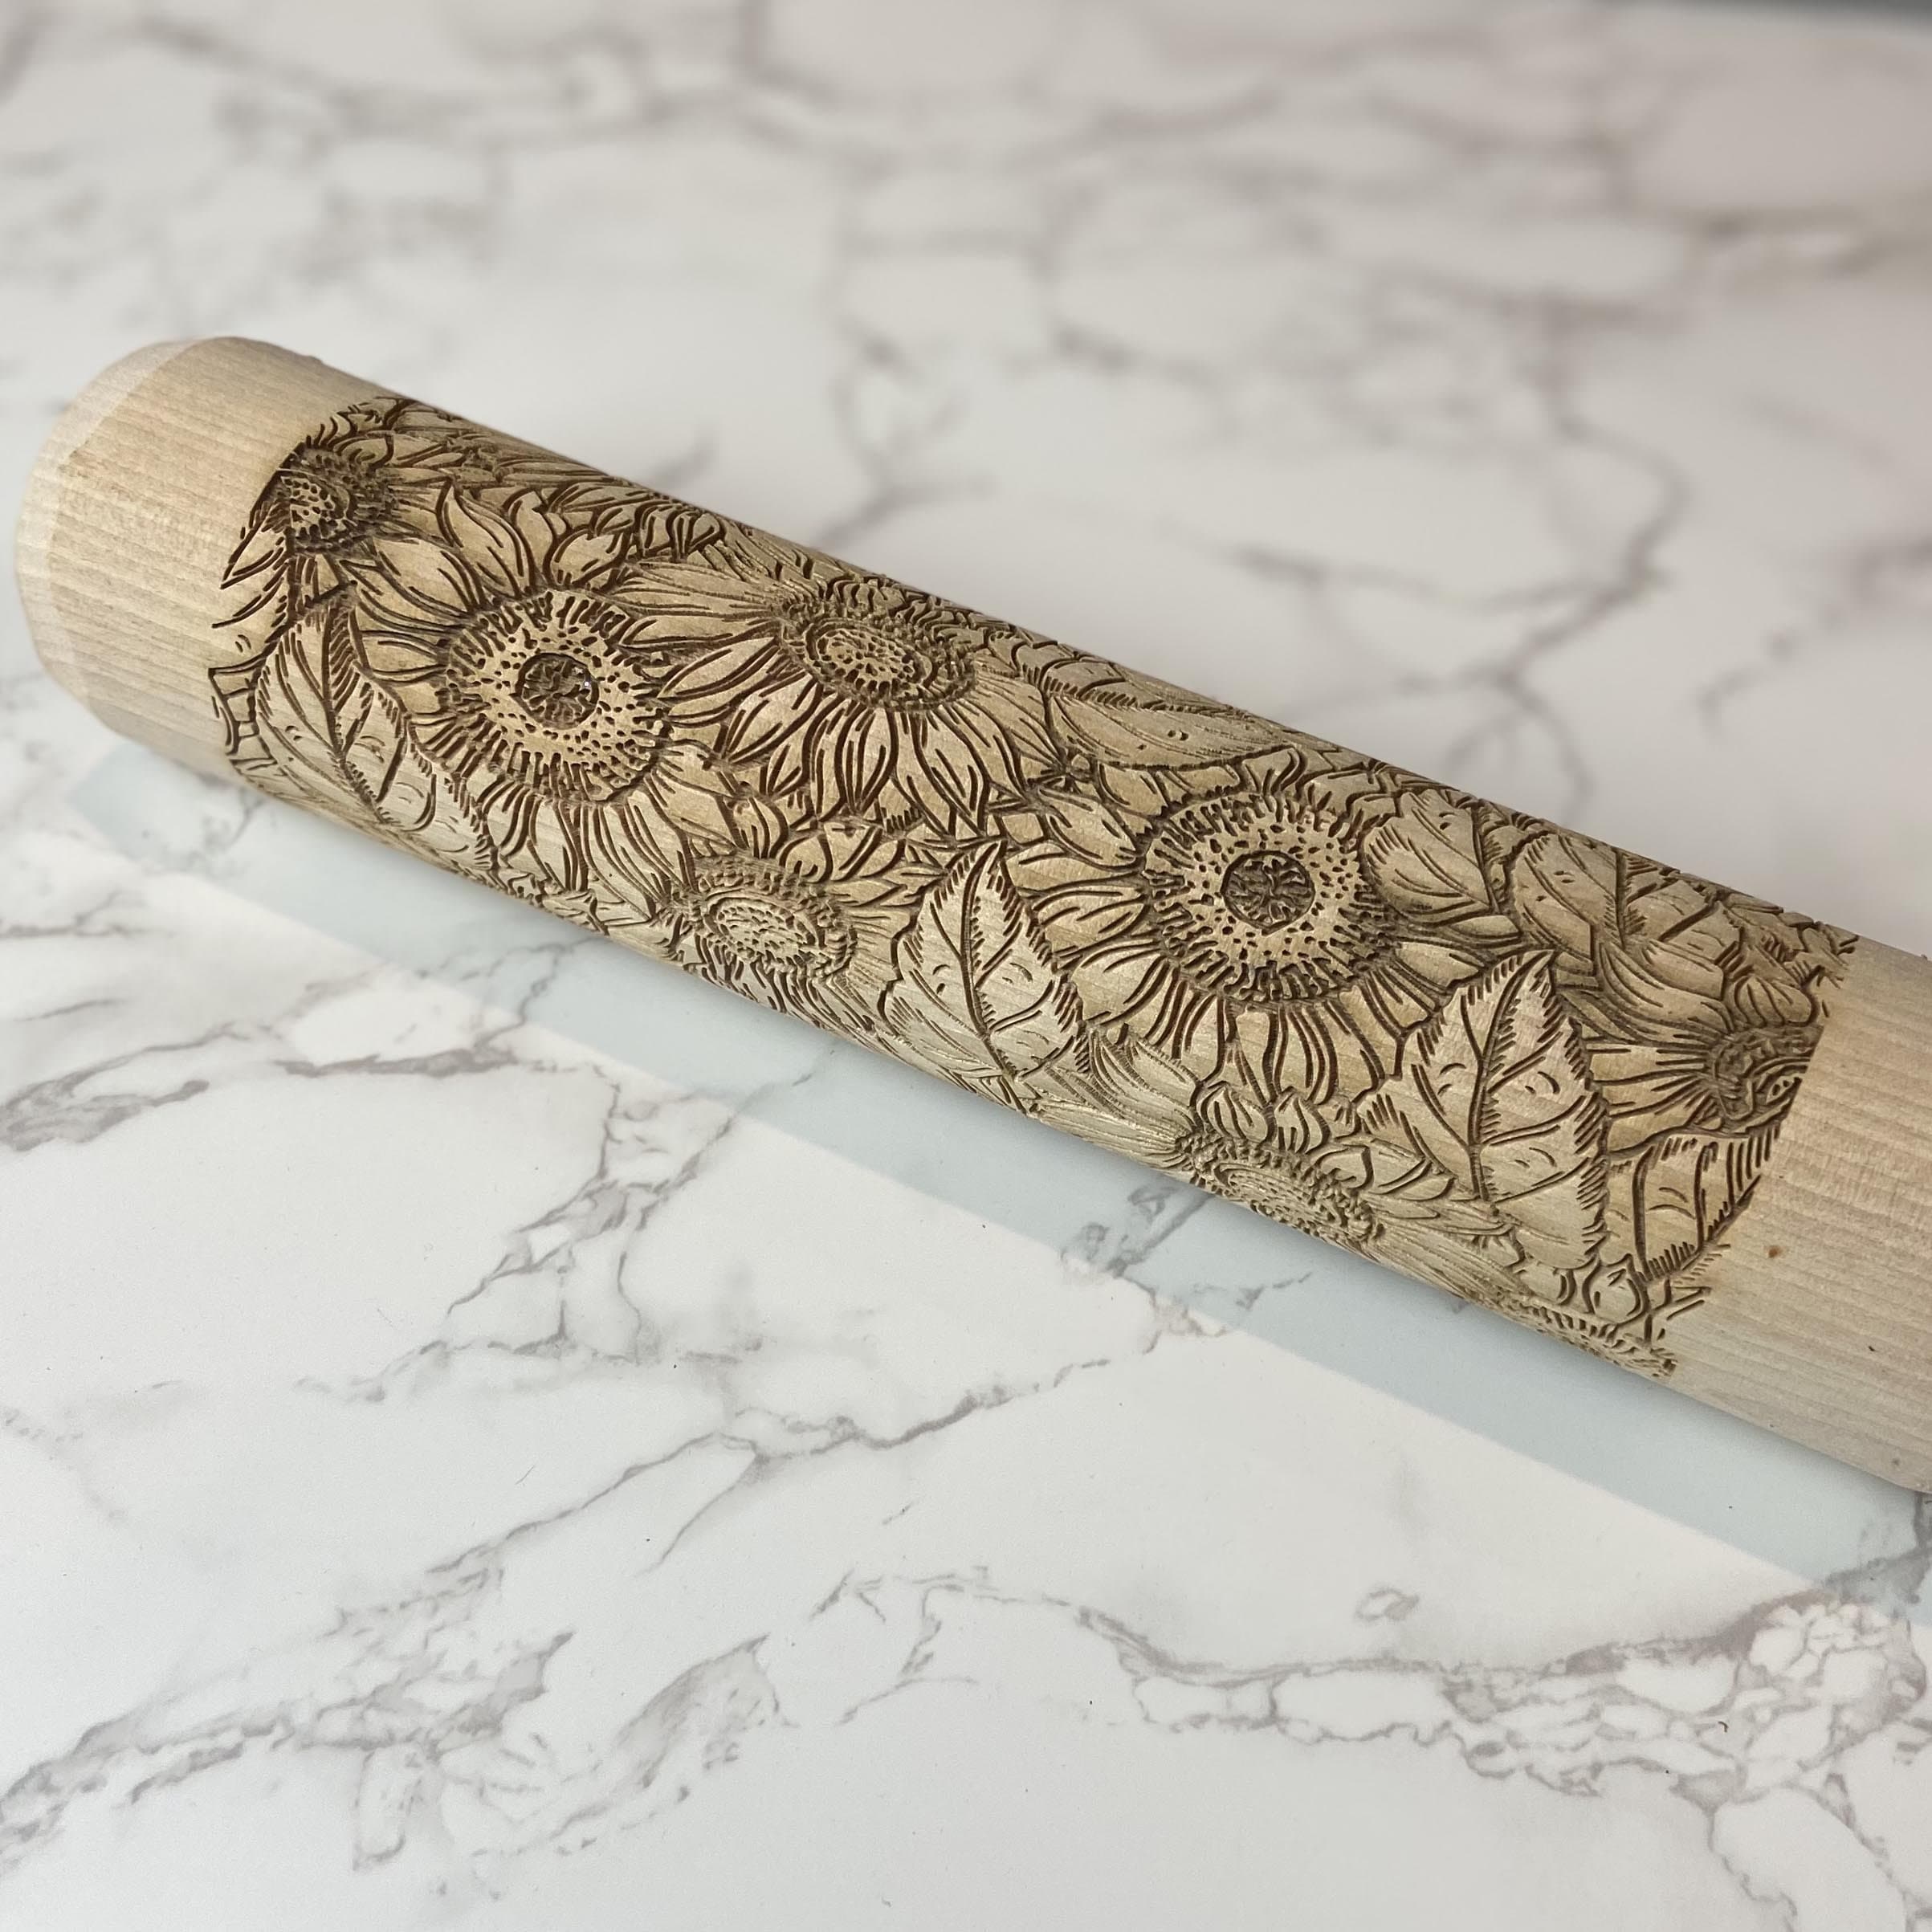 Pottery Clay Wood Texture Rolling Pin Pressed Printing Striped